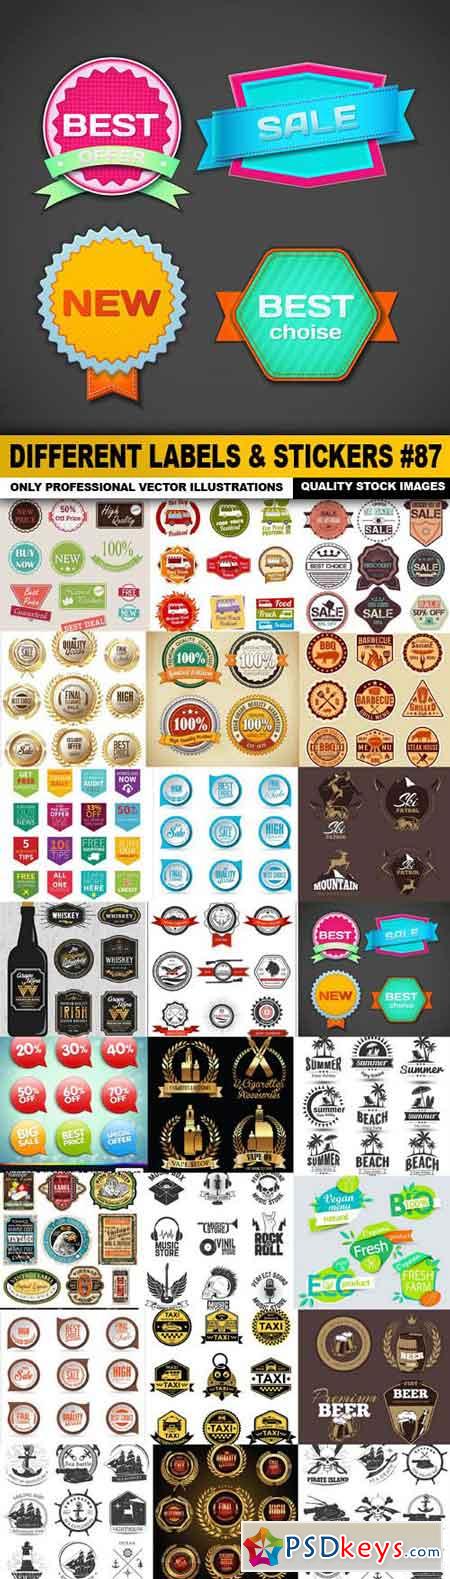 Different Labels & Stickers #87 - 25 Vector